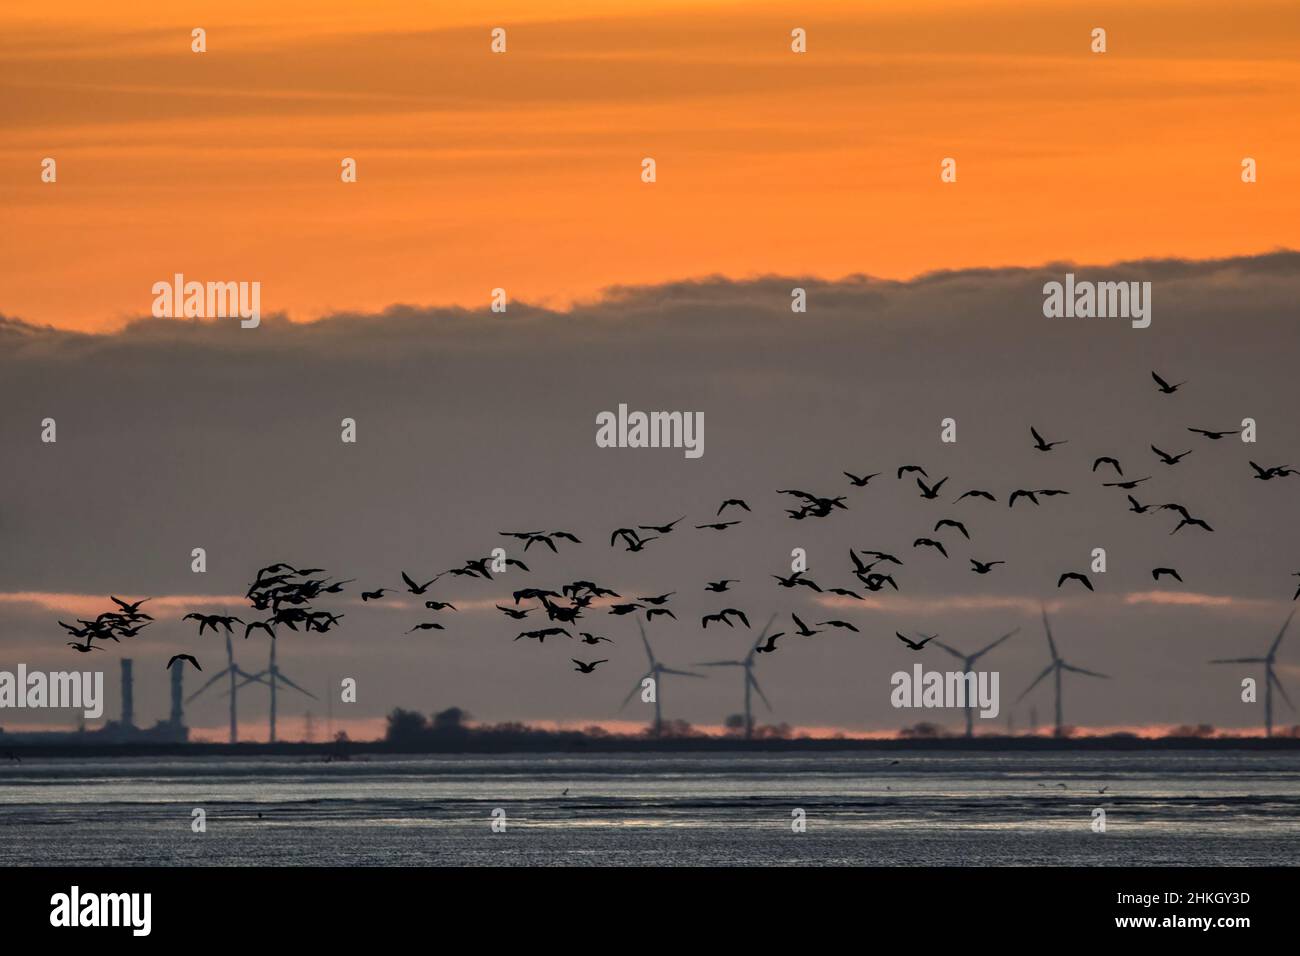 Pink footed geese, Anser brachyrhynchus, flying over the Wash to roost at sunset. Sutton Bridge Power Station & Gedney Marsh wind farm in background. Stock Photo